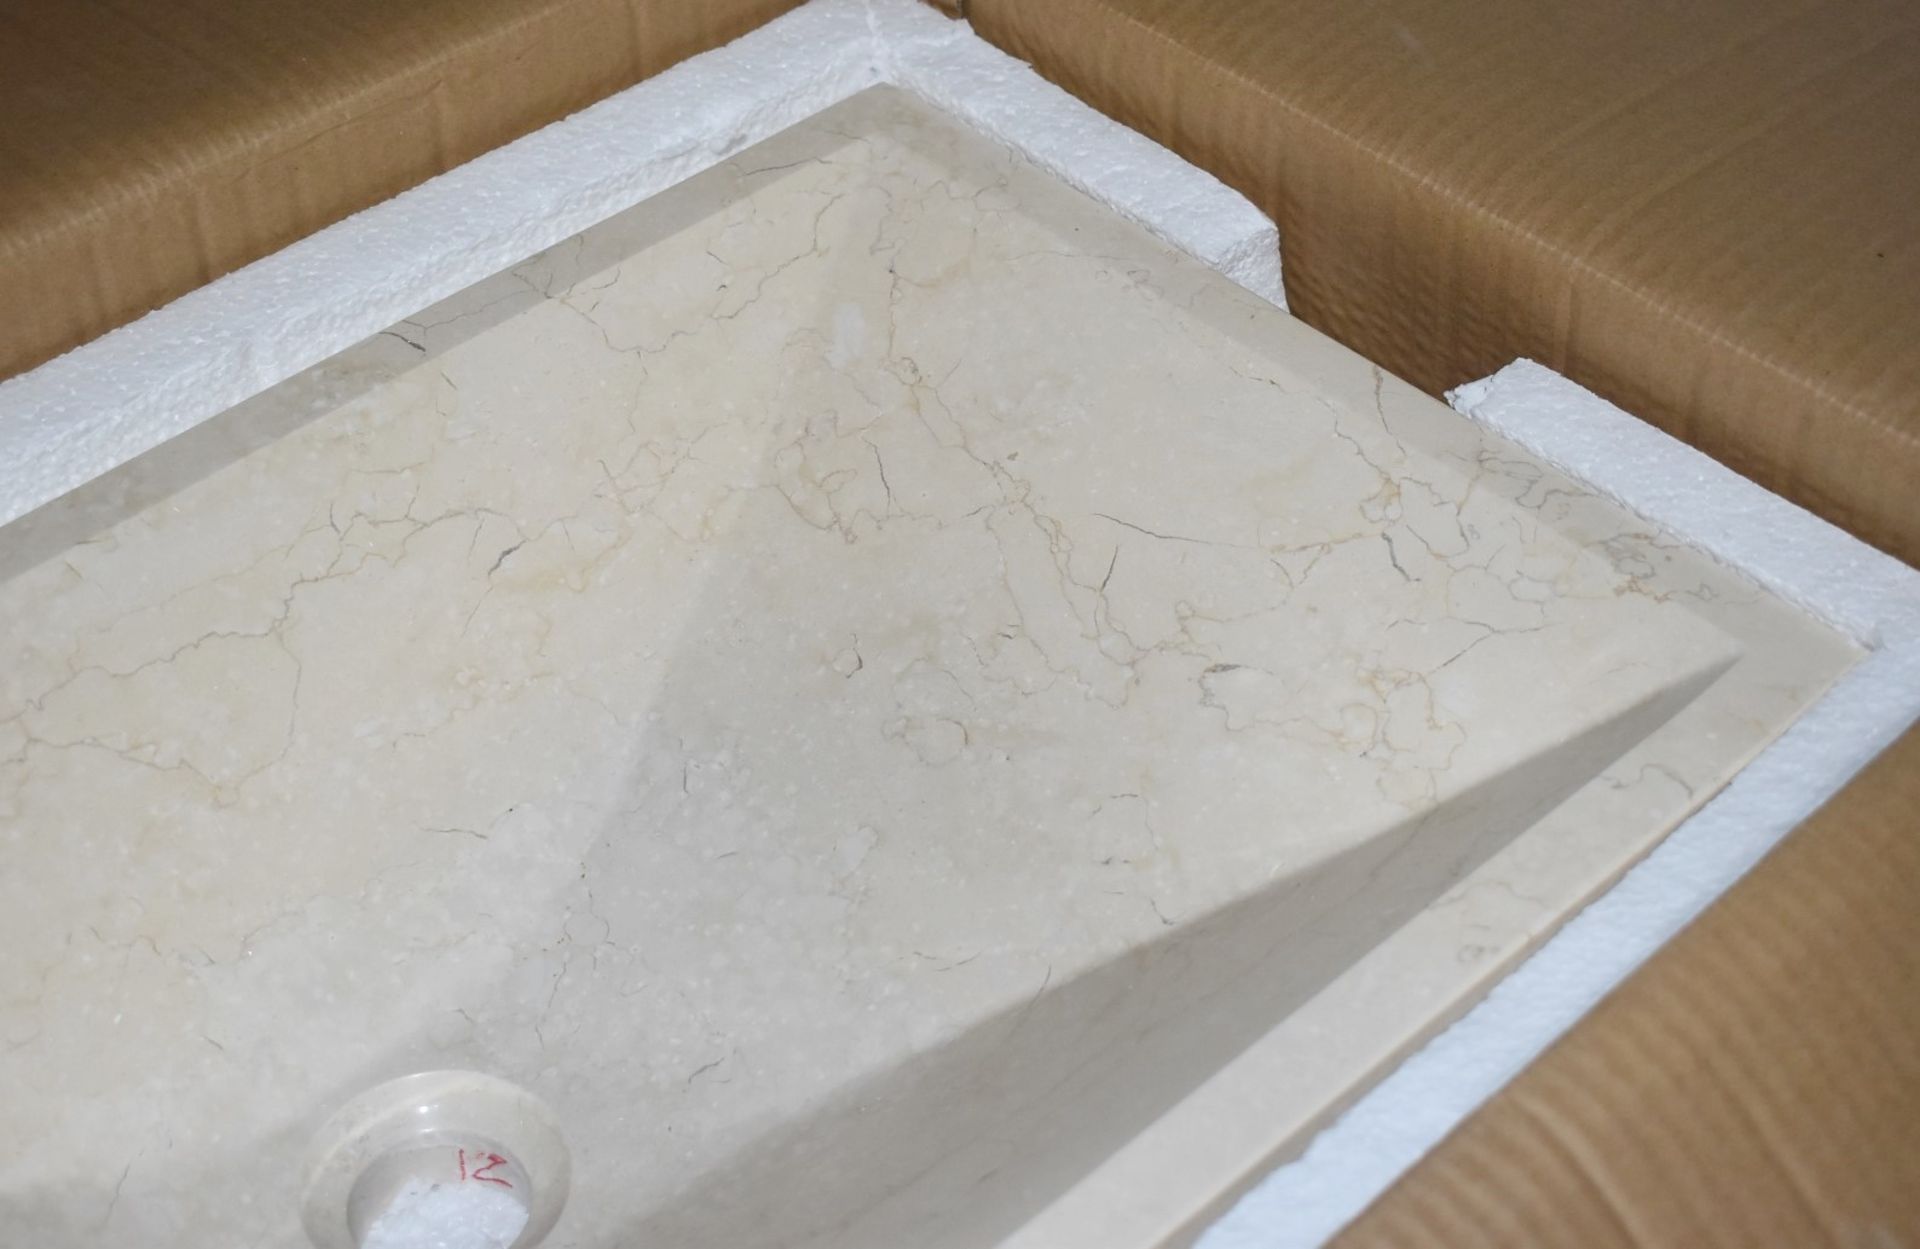 1 x Stonearth 'Karo' Solid Galala Marble Stone Countertop Sink Basin - New Boxed Stock - RRP £ - Image 4 of 8